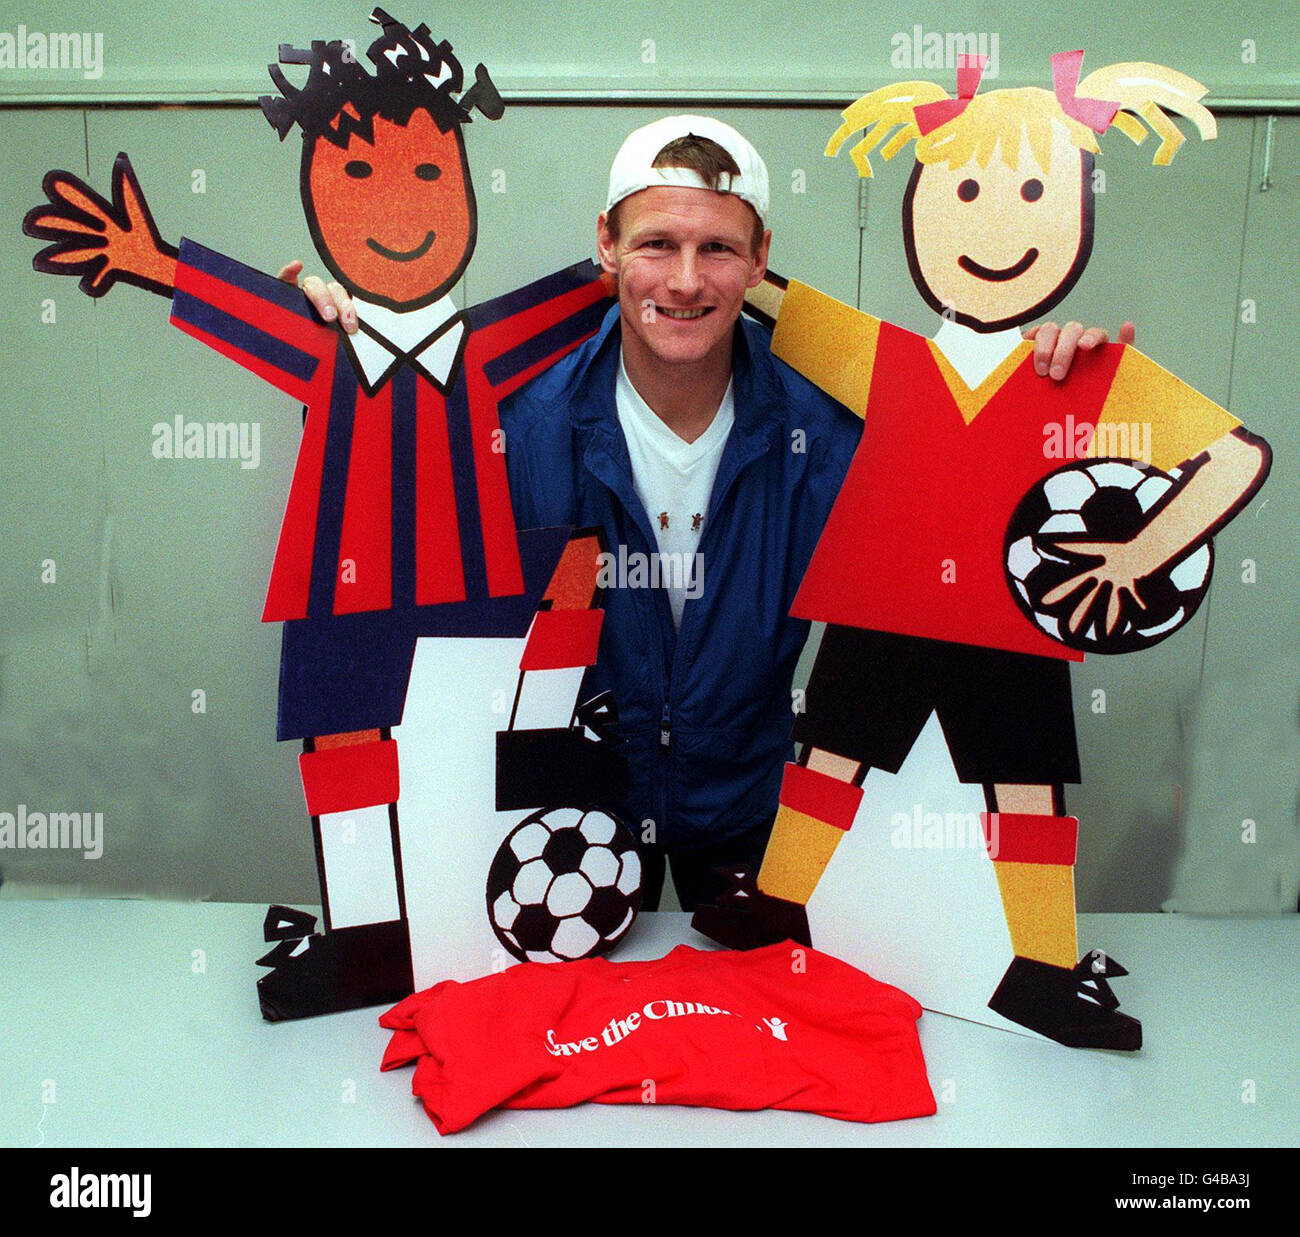 England soccer star Teddy Sheringham during a photocall at Salford Quays in Manchester today (Tuesday) where he launched Save the Children's 'Footie Fundraiser' pin badge campaign which coincides with the World Cup. Save the Children, are hoping to raise 100,000 from the sale of these badges. PA Photos. Stock Photo